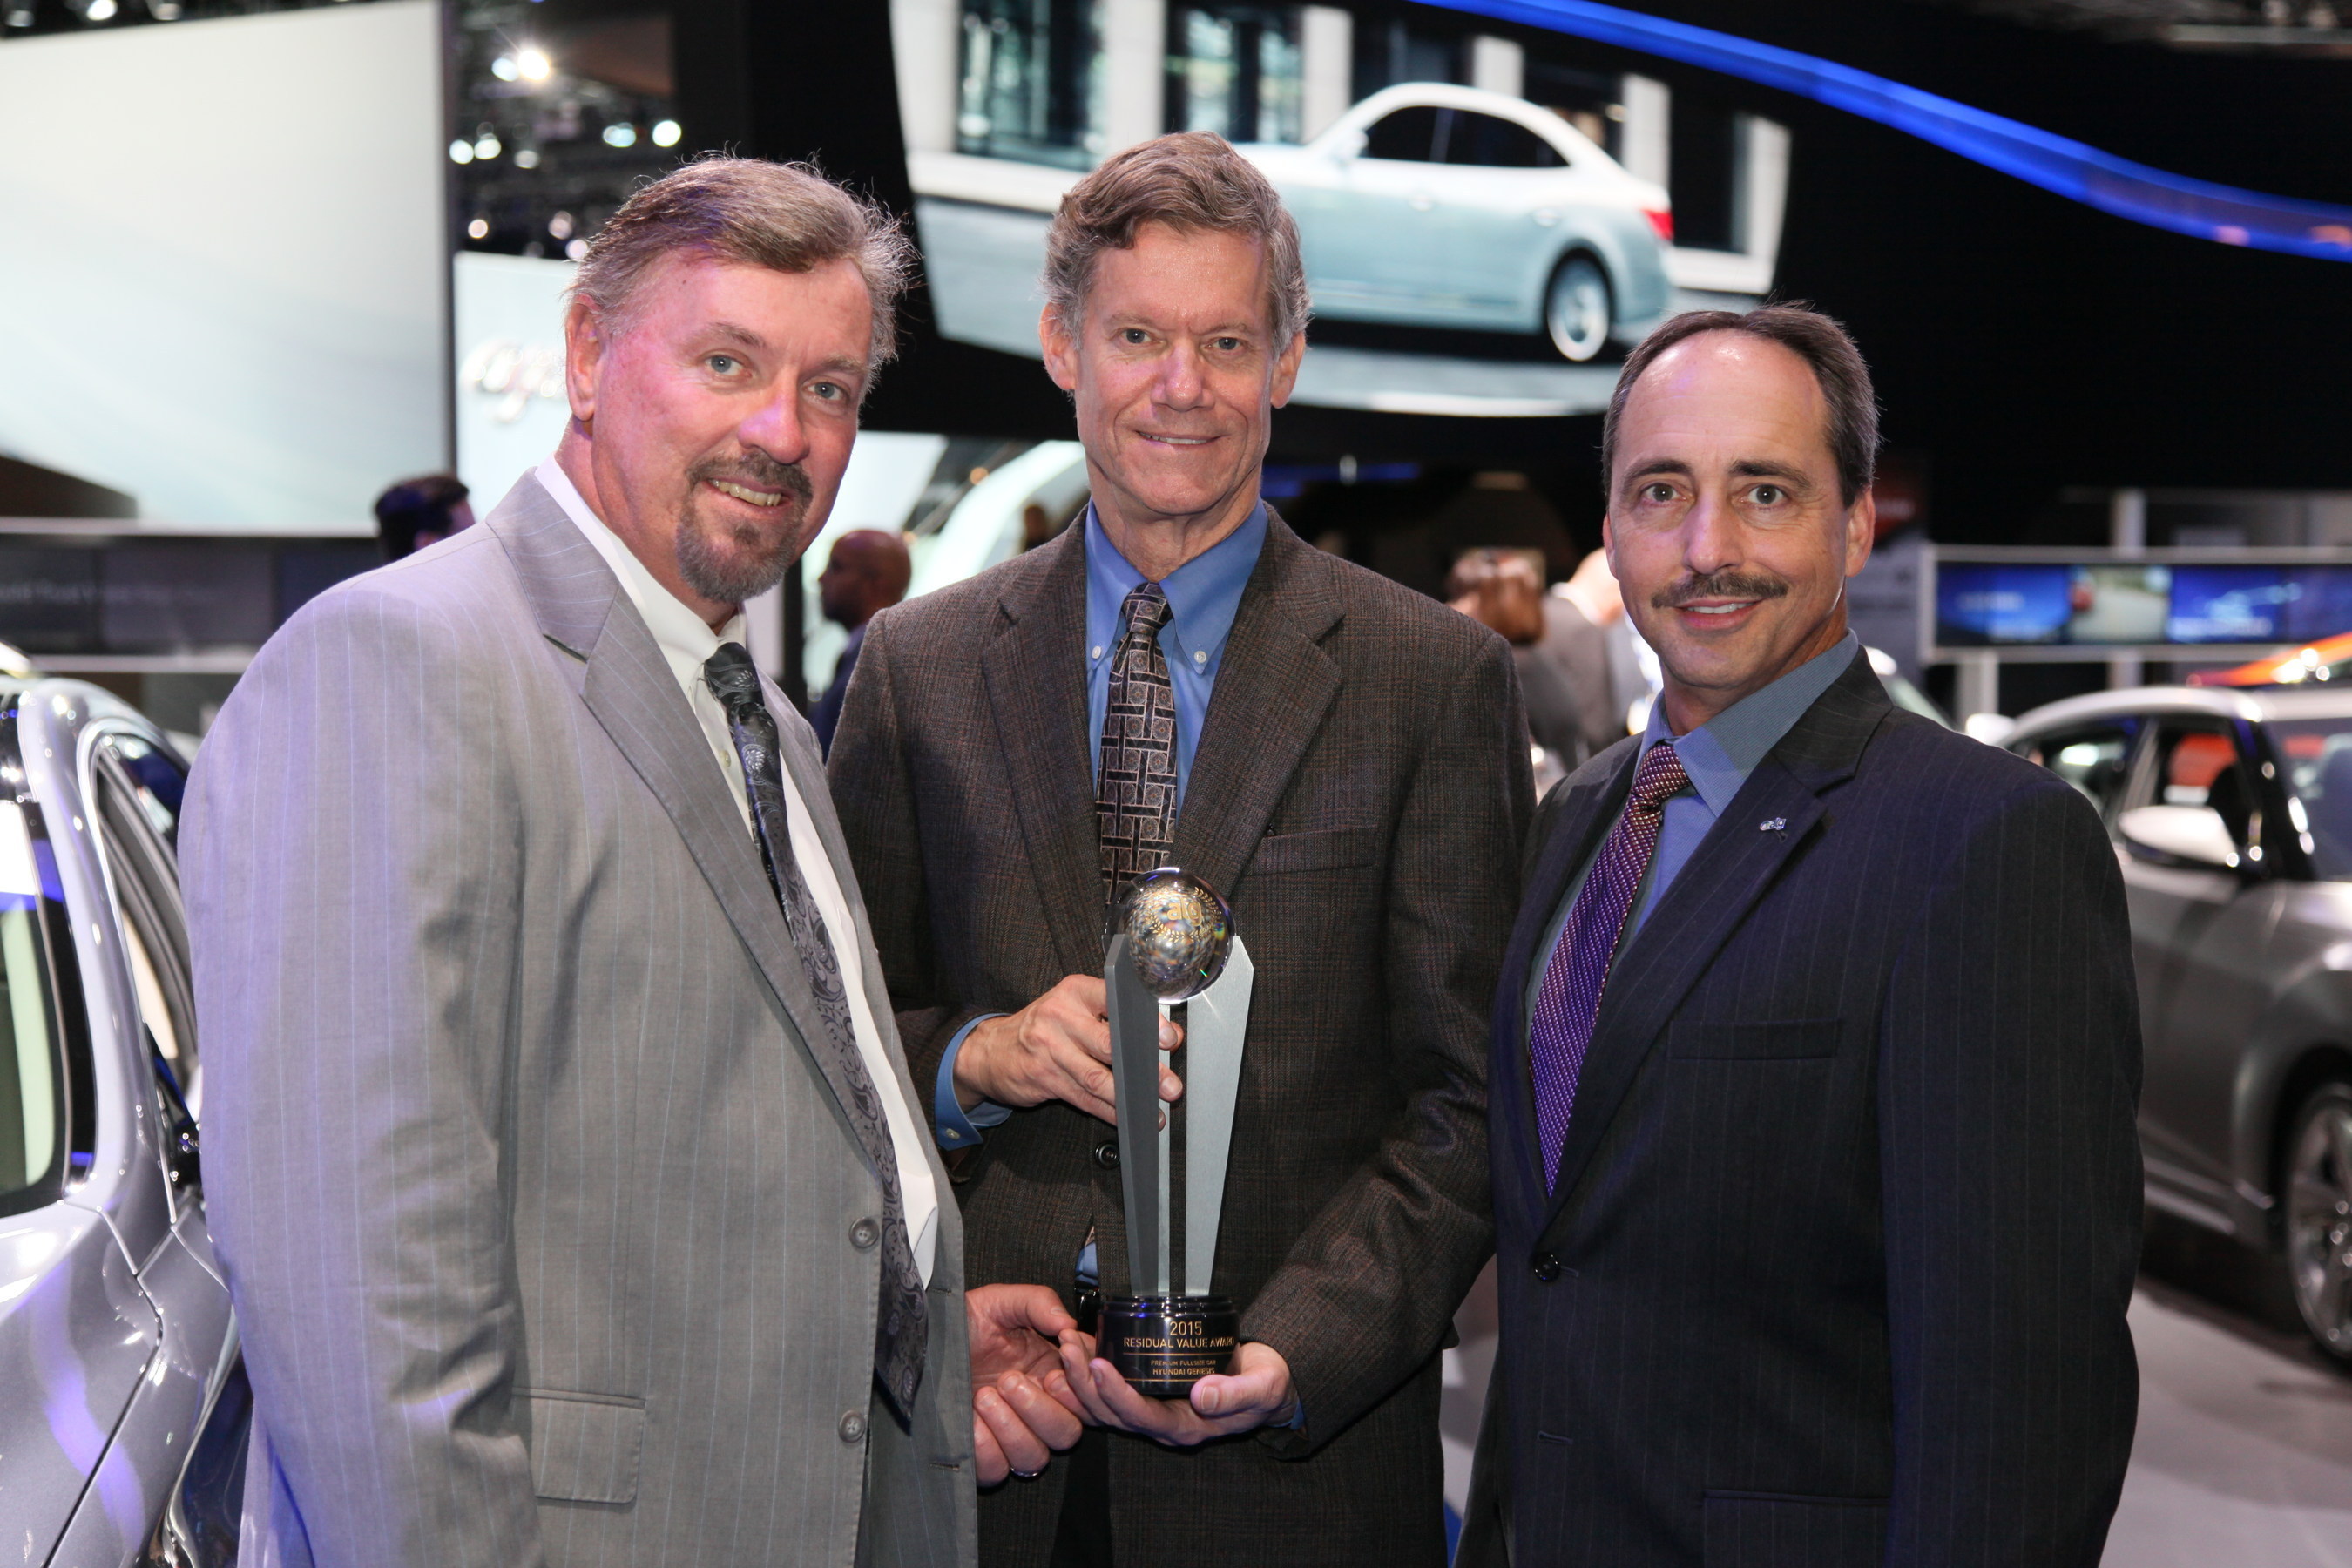 Larry Dominique, president, ALG hands the ALG Best Residual Value award for the Premium Full-Size Car Segment that 2015 Genesis won to Dave Zuchowski, president and CEO, Hyundai Motor America and Mike O'Brien, vice president, corporate and product planning, Hyundai Motor America (center).